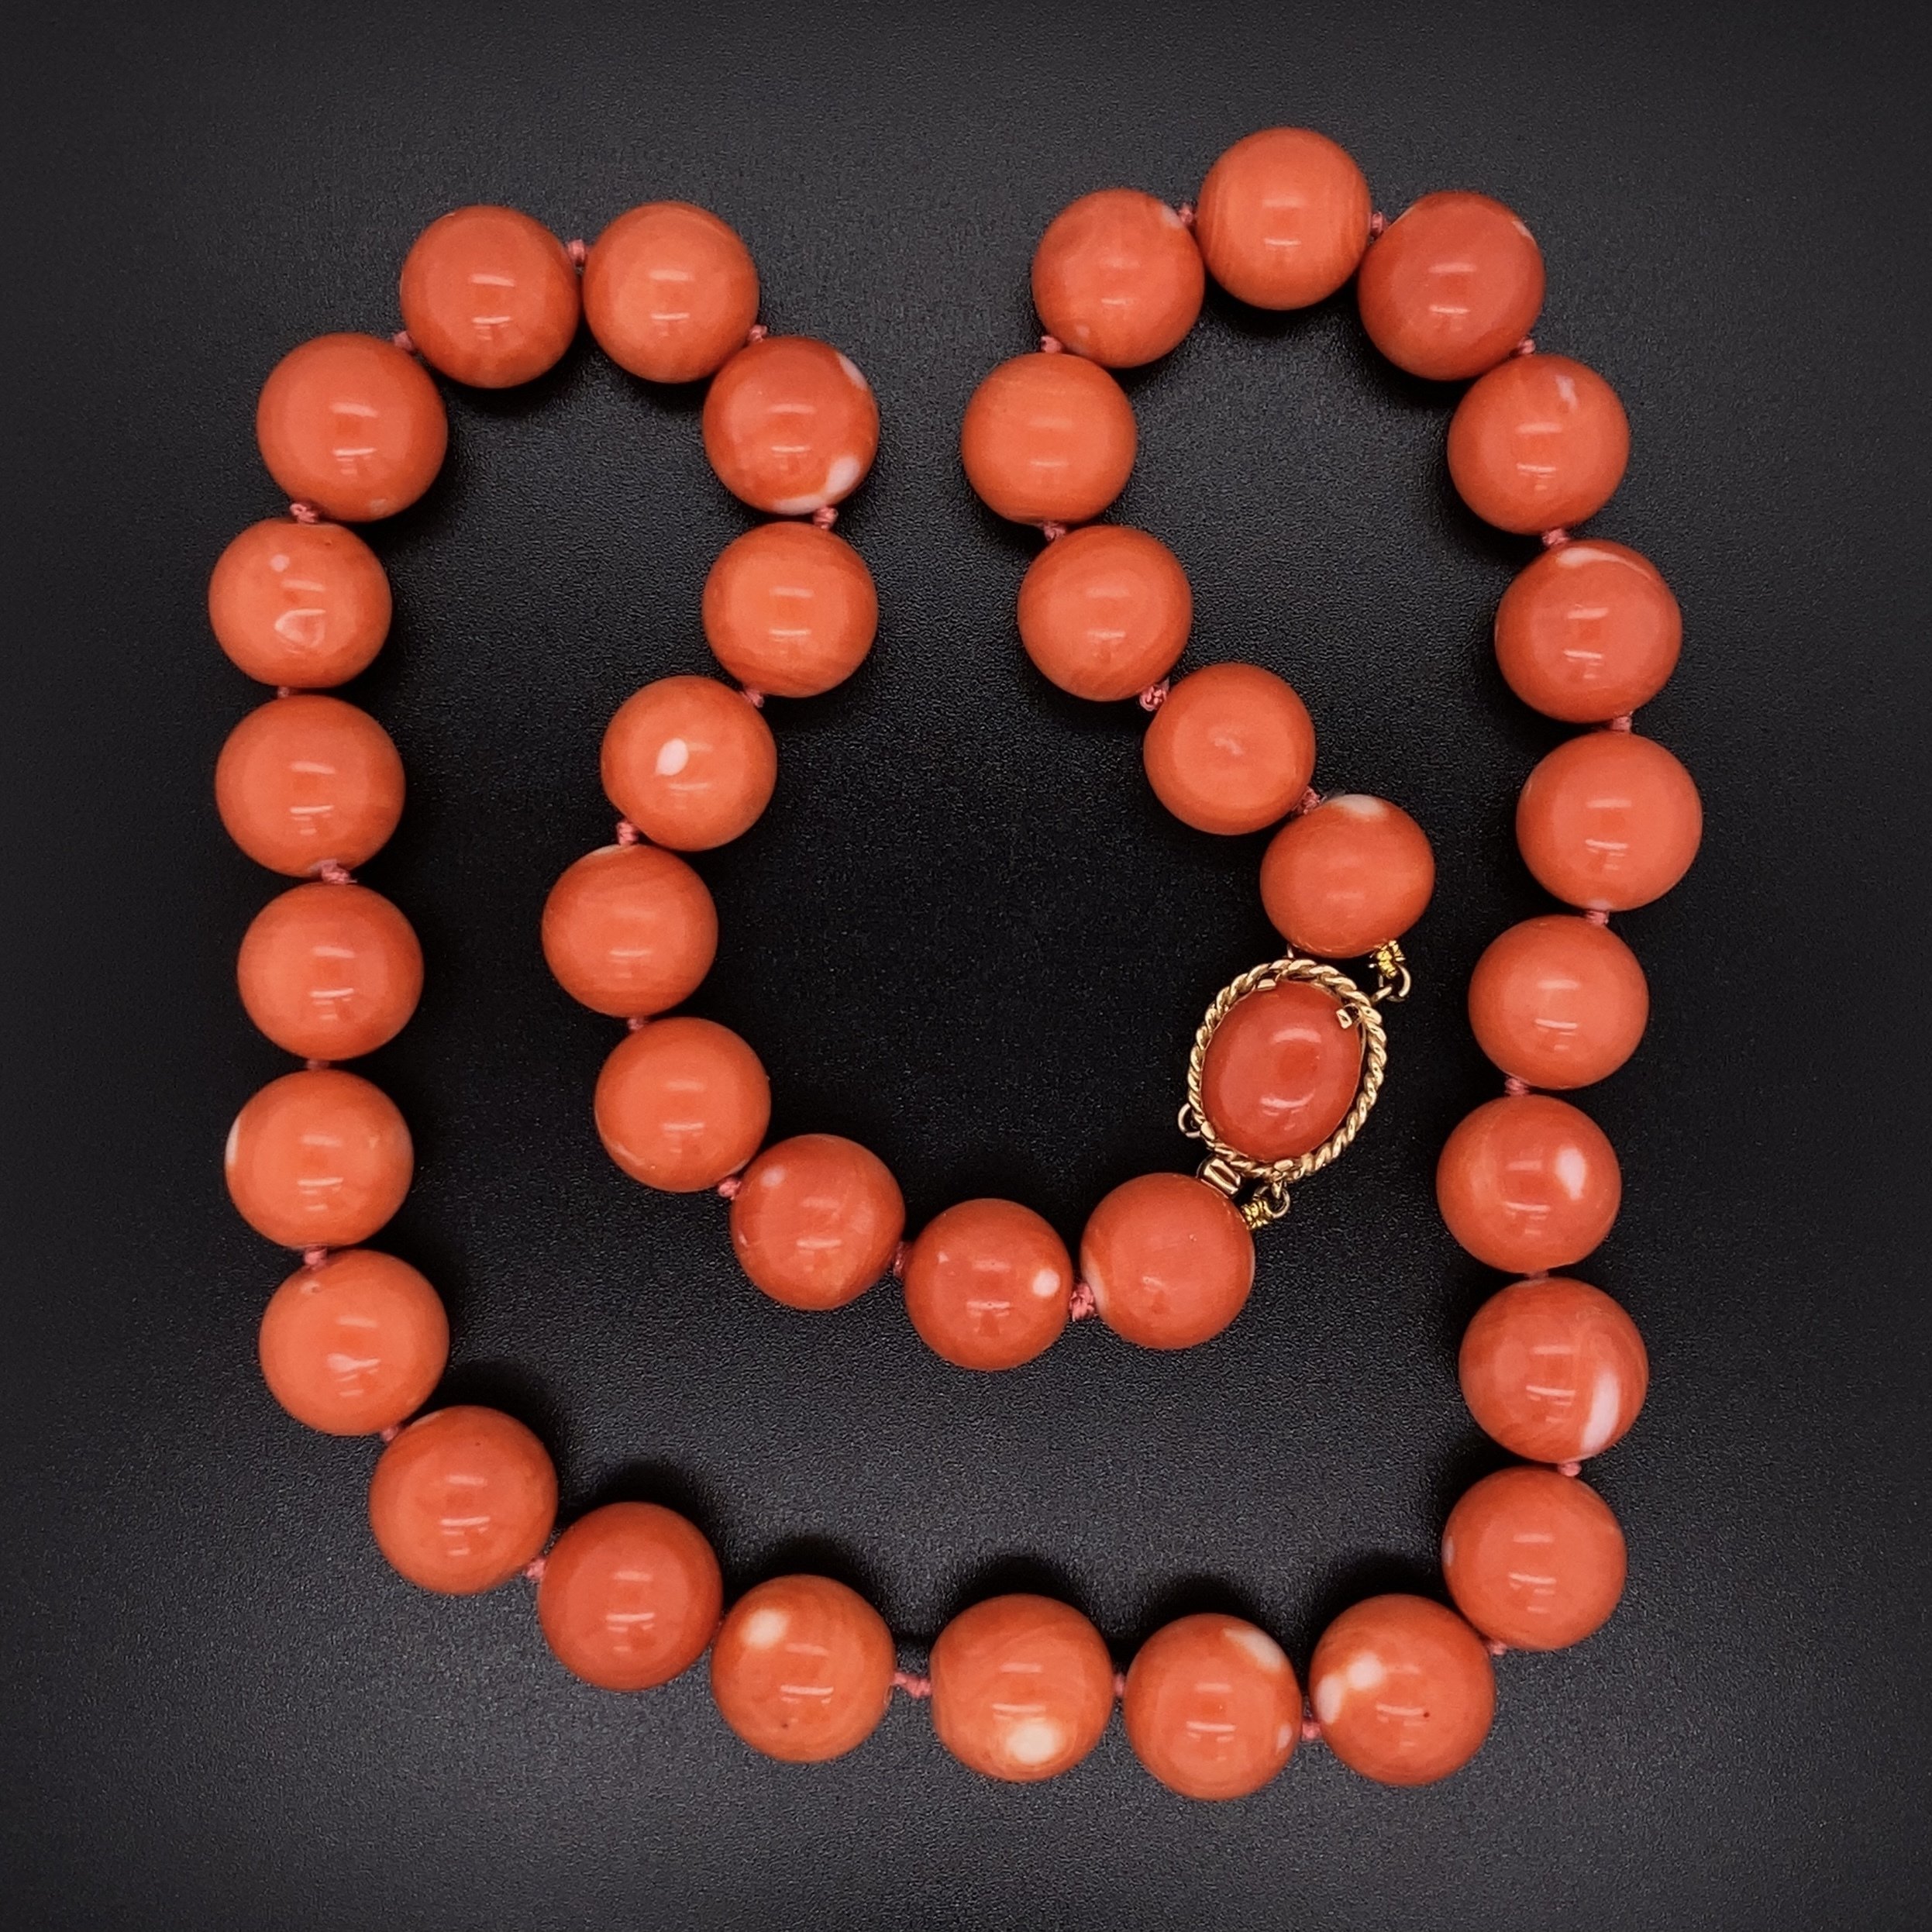 14K YG 11.5mm RARE Pacific Coral Round Bead Necklace c1960 78.9g, 17.75"